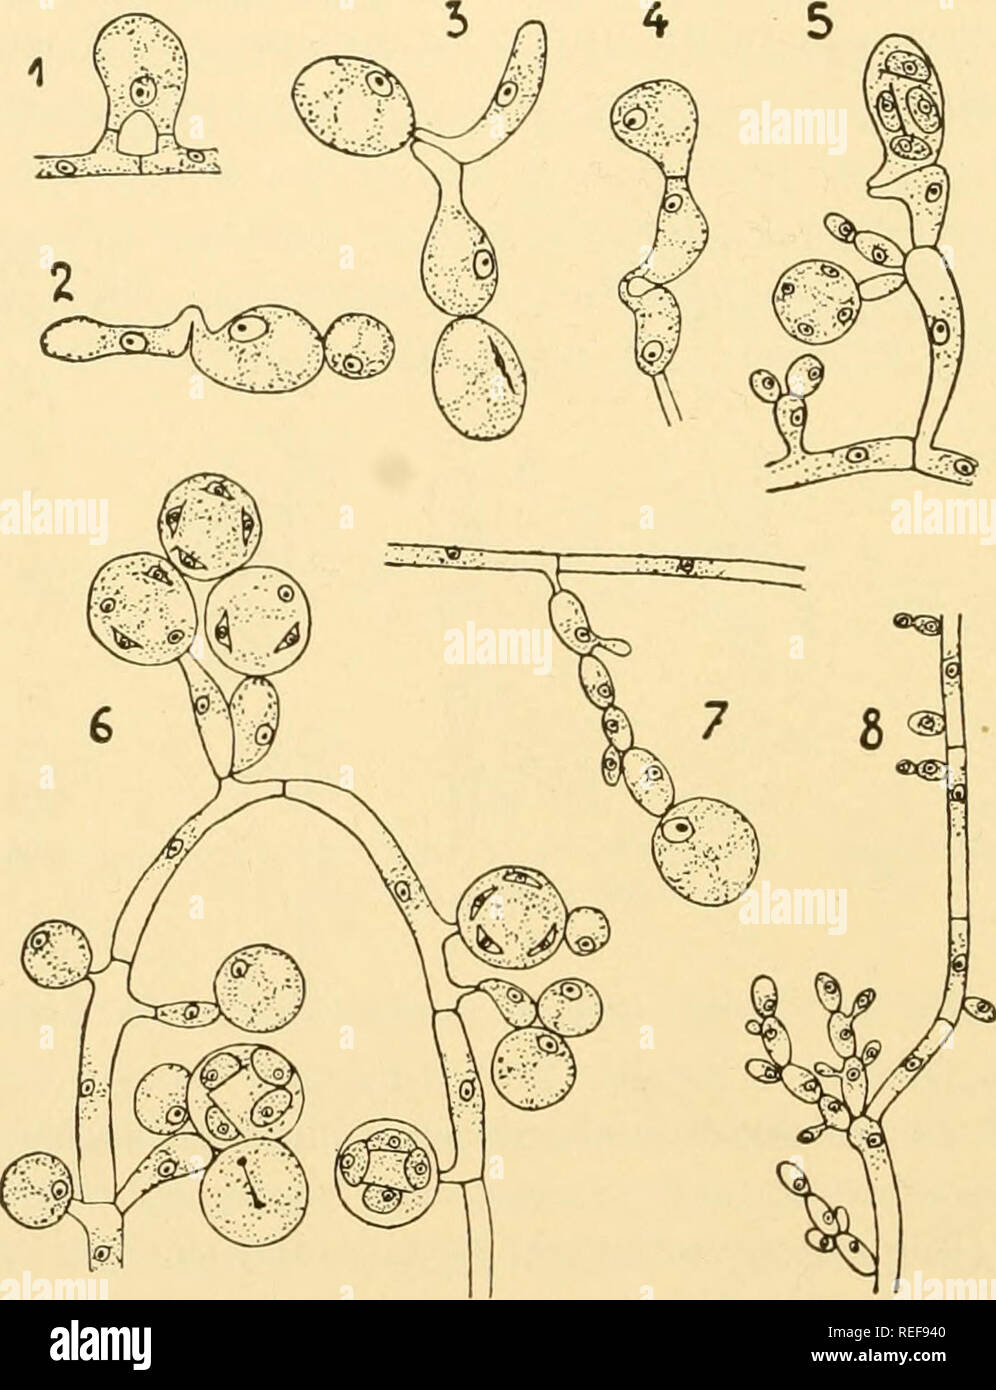 . Comparative morphology of Fungi. Fungi. 142 COMPARATIVE MORPHOLOGY OF FUNGI cease, and thus hyphae may form sprout cells and asci simultaneously. One finds even young asci which continue to cut off sprout cells until they begin spore formation. Periods of vegetative growth and fructification are thus not sharply separated from each other. The asci contain four spores of a peculiar hat shape, such as we shall meet later in Endomyces decipiens and in Willia of the Saccharomyceta- cese. At germination they throw off the exospore and germinate with either germ tube or sprout mycelium (Dombrowski Stock Photo